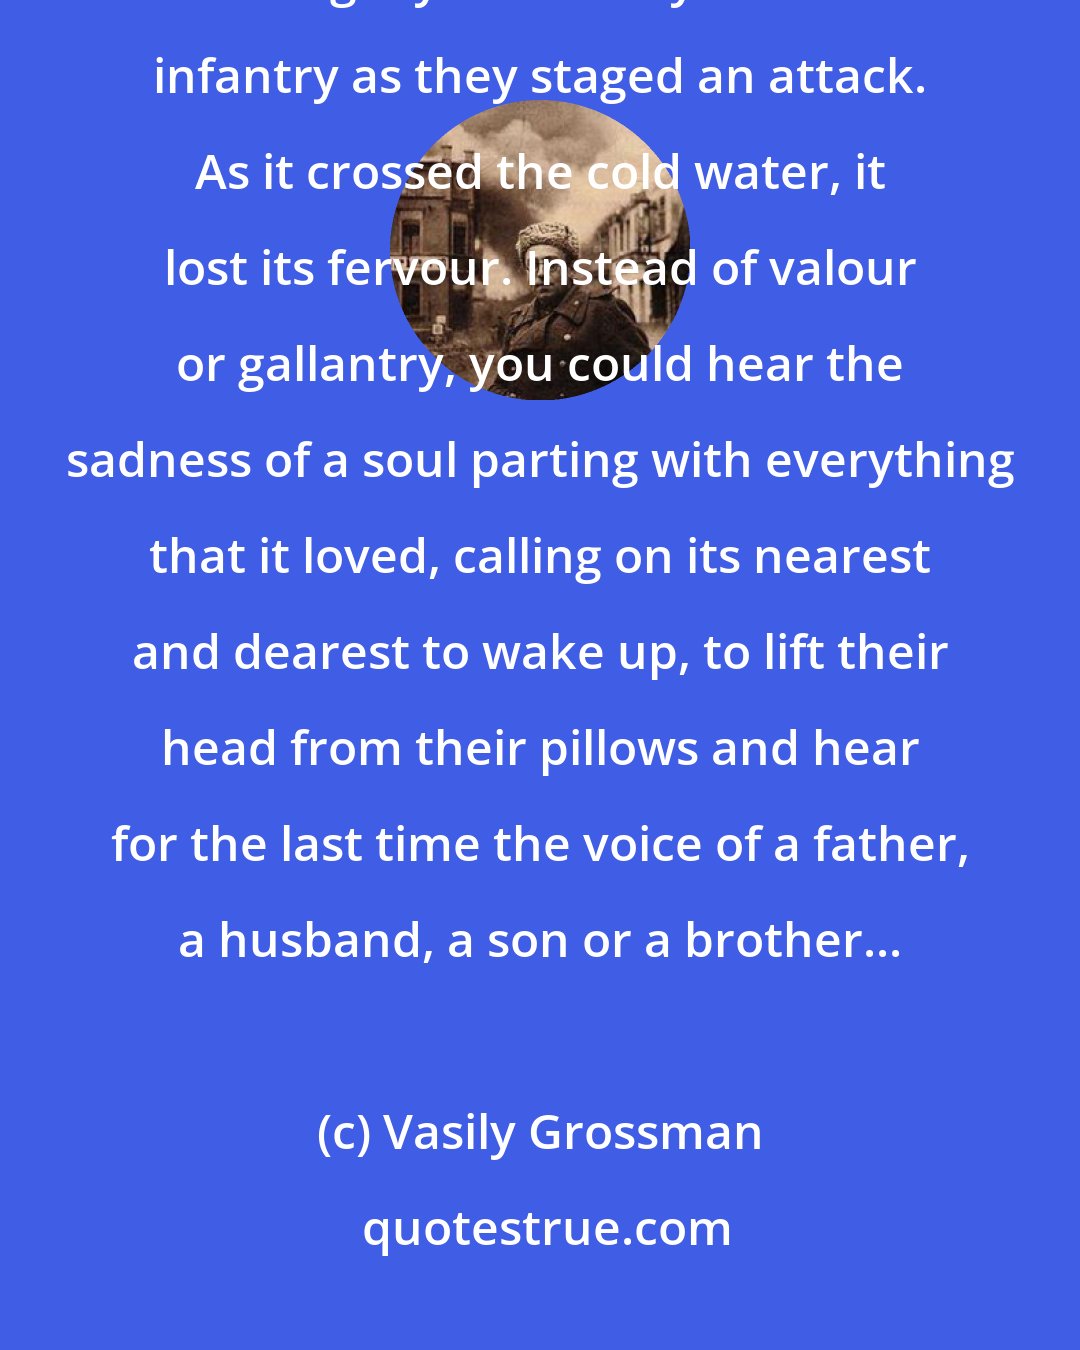 Vasily Grossman: There was something terrible, but also something sad and melancholy in this long cry uttered by the Russian infantry as they staged an attack. As it crossed the cold water, it lost its fervour. Instead of valour or gallantry, you could hear the sadness of a soul parting with everything that it loved, calling on its nearest and dearest to wake up, to lift their head from their pillows and hear for the last time the voice of a father, a husband, a son or a brother...